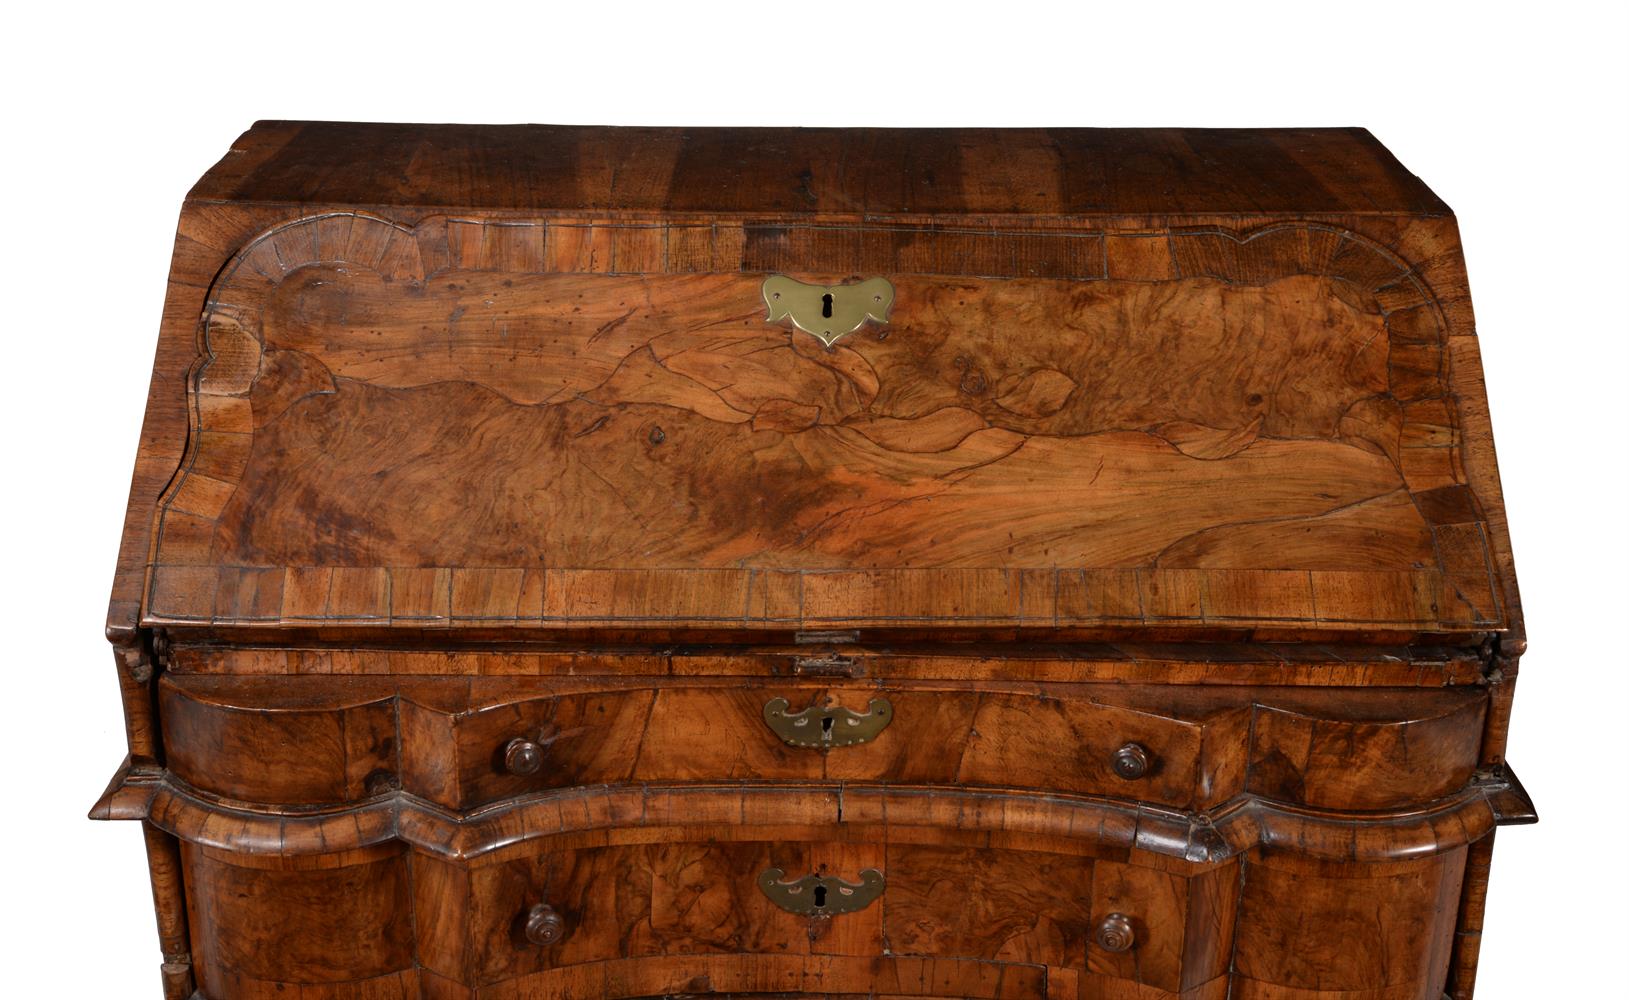 A NEAR PAIR OF SOUTH GERMAN FIGURED WALNUT AND CROSSBANDED BUREAUX, MID 18TH CENTURY - Image 5 of 8